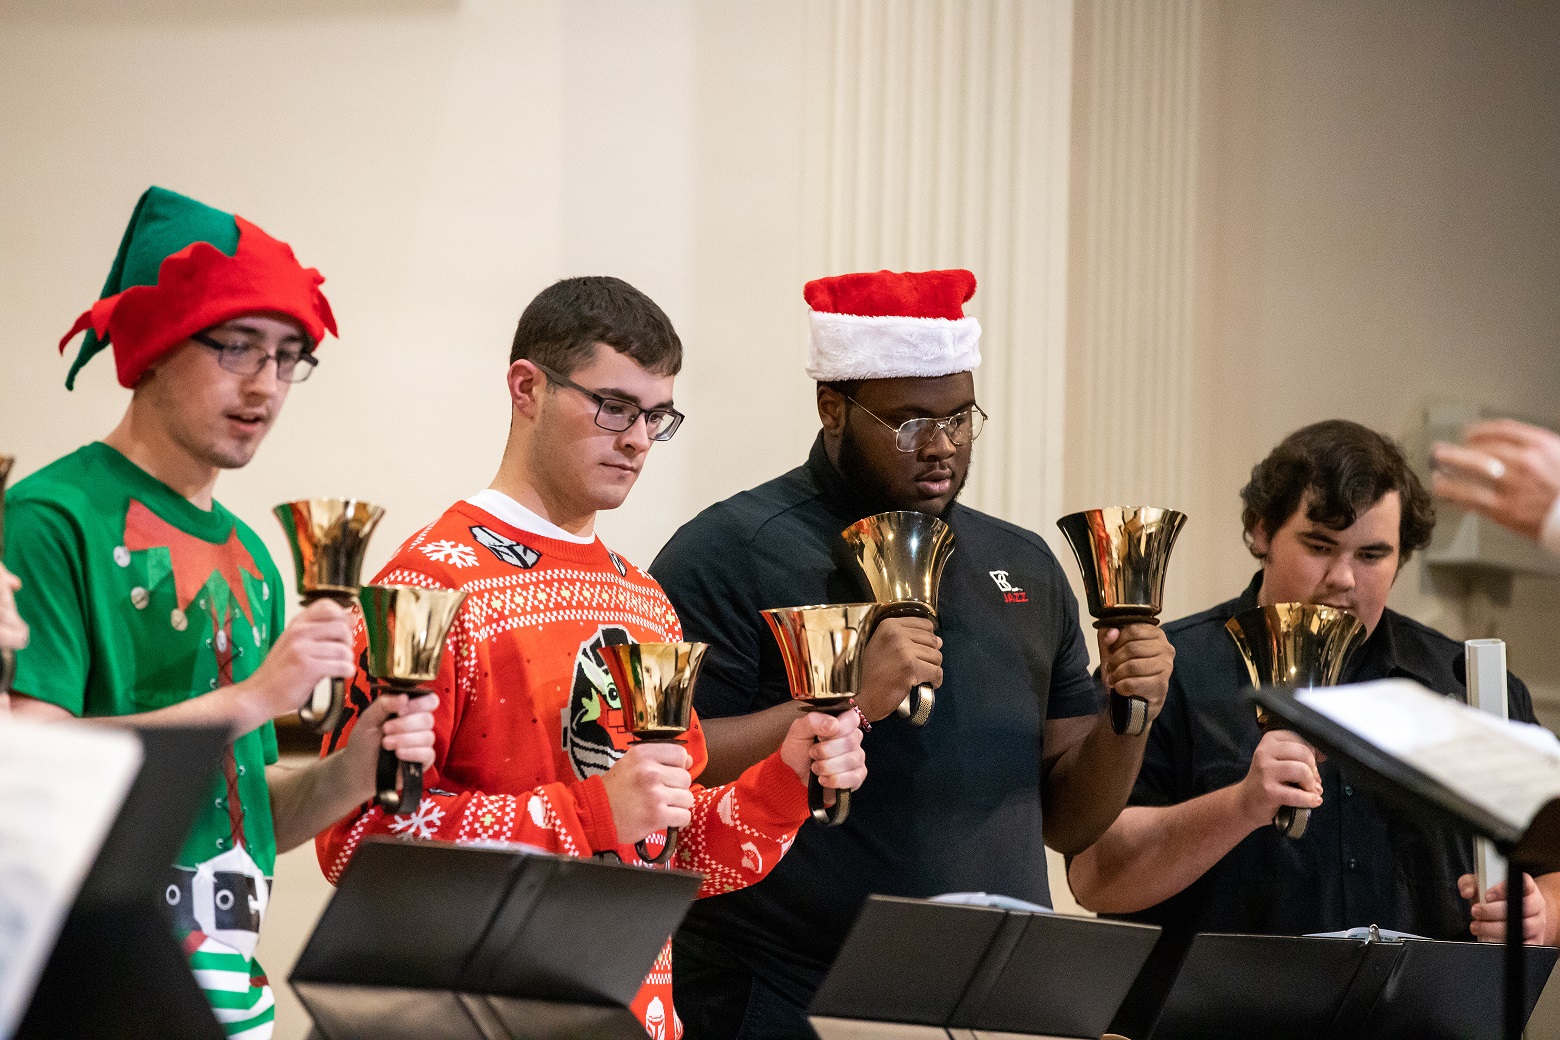 Three male students wearing holiday themed attired and holding hand bells